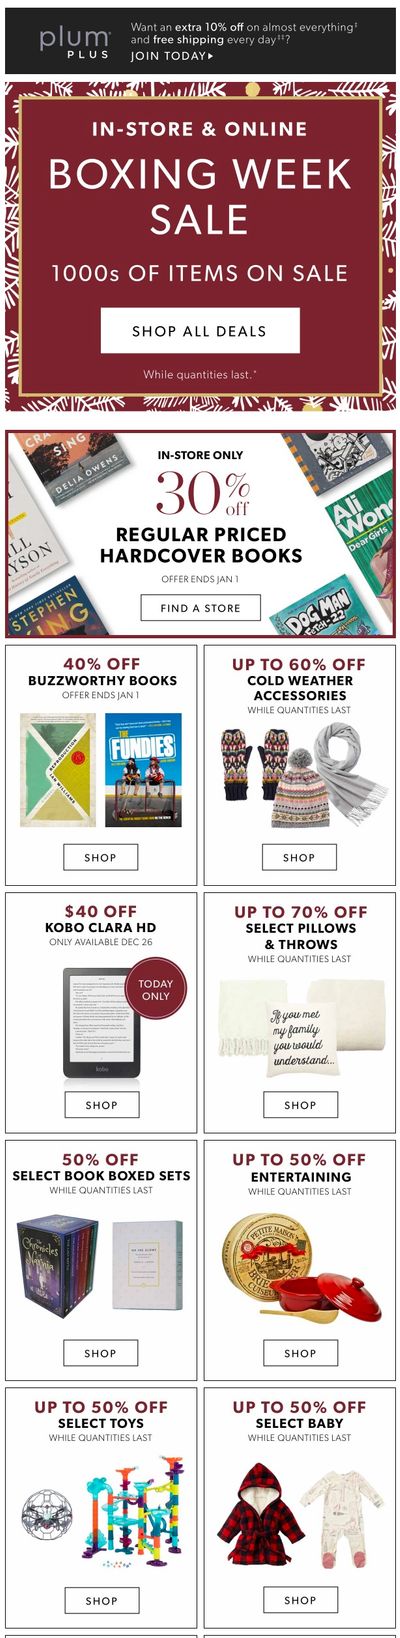 Chapters Indigo Boxing Week Sale December 26 to January 2